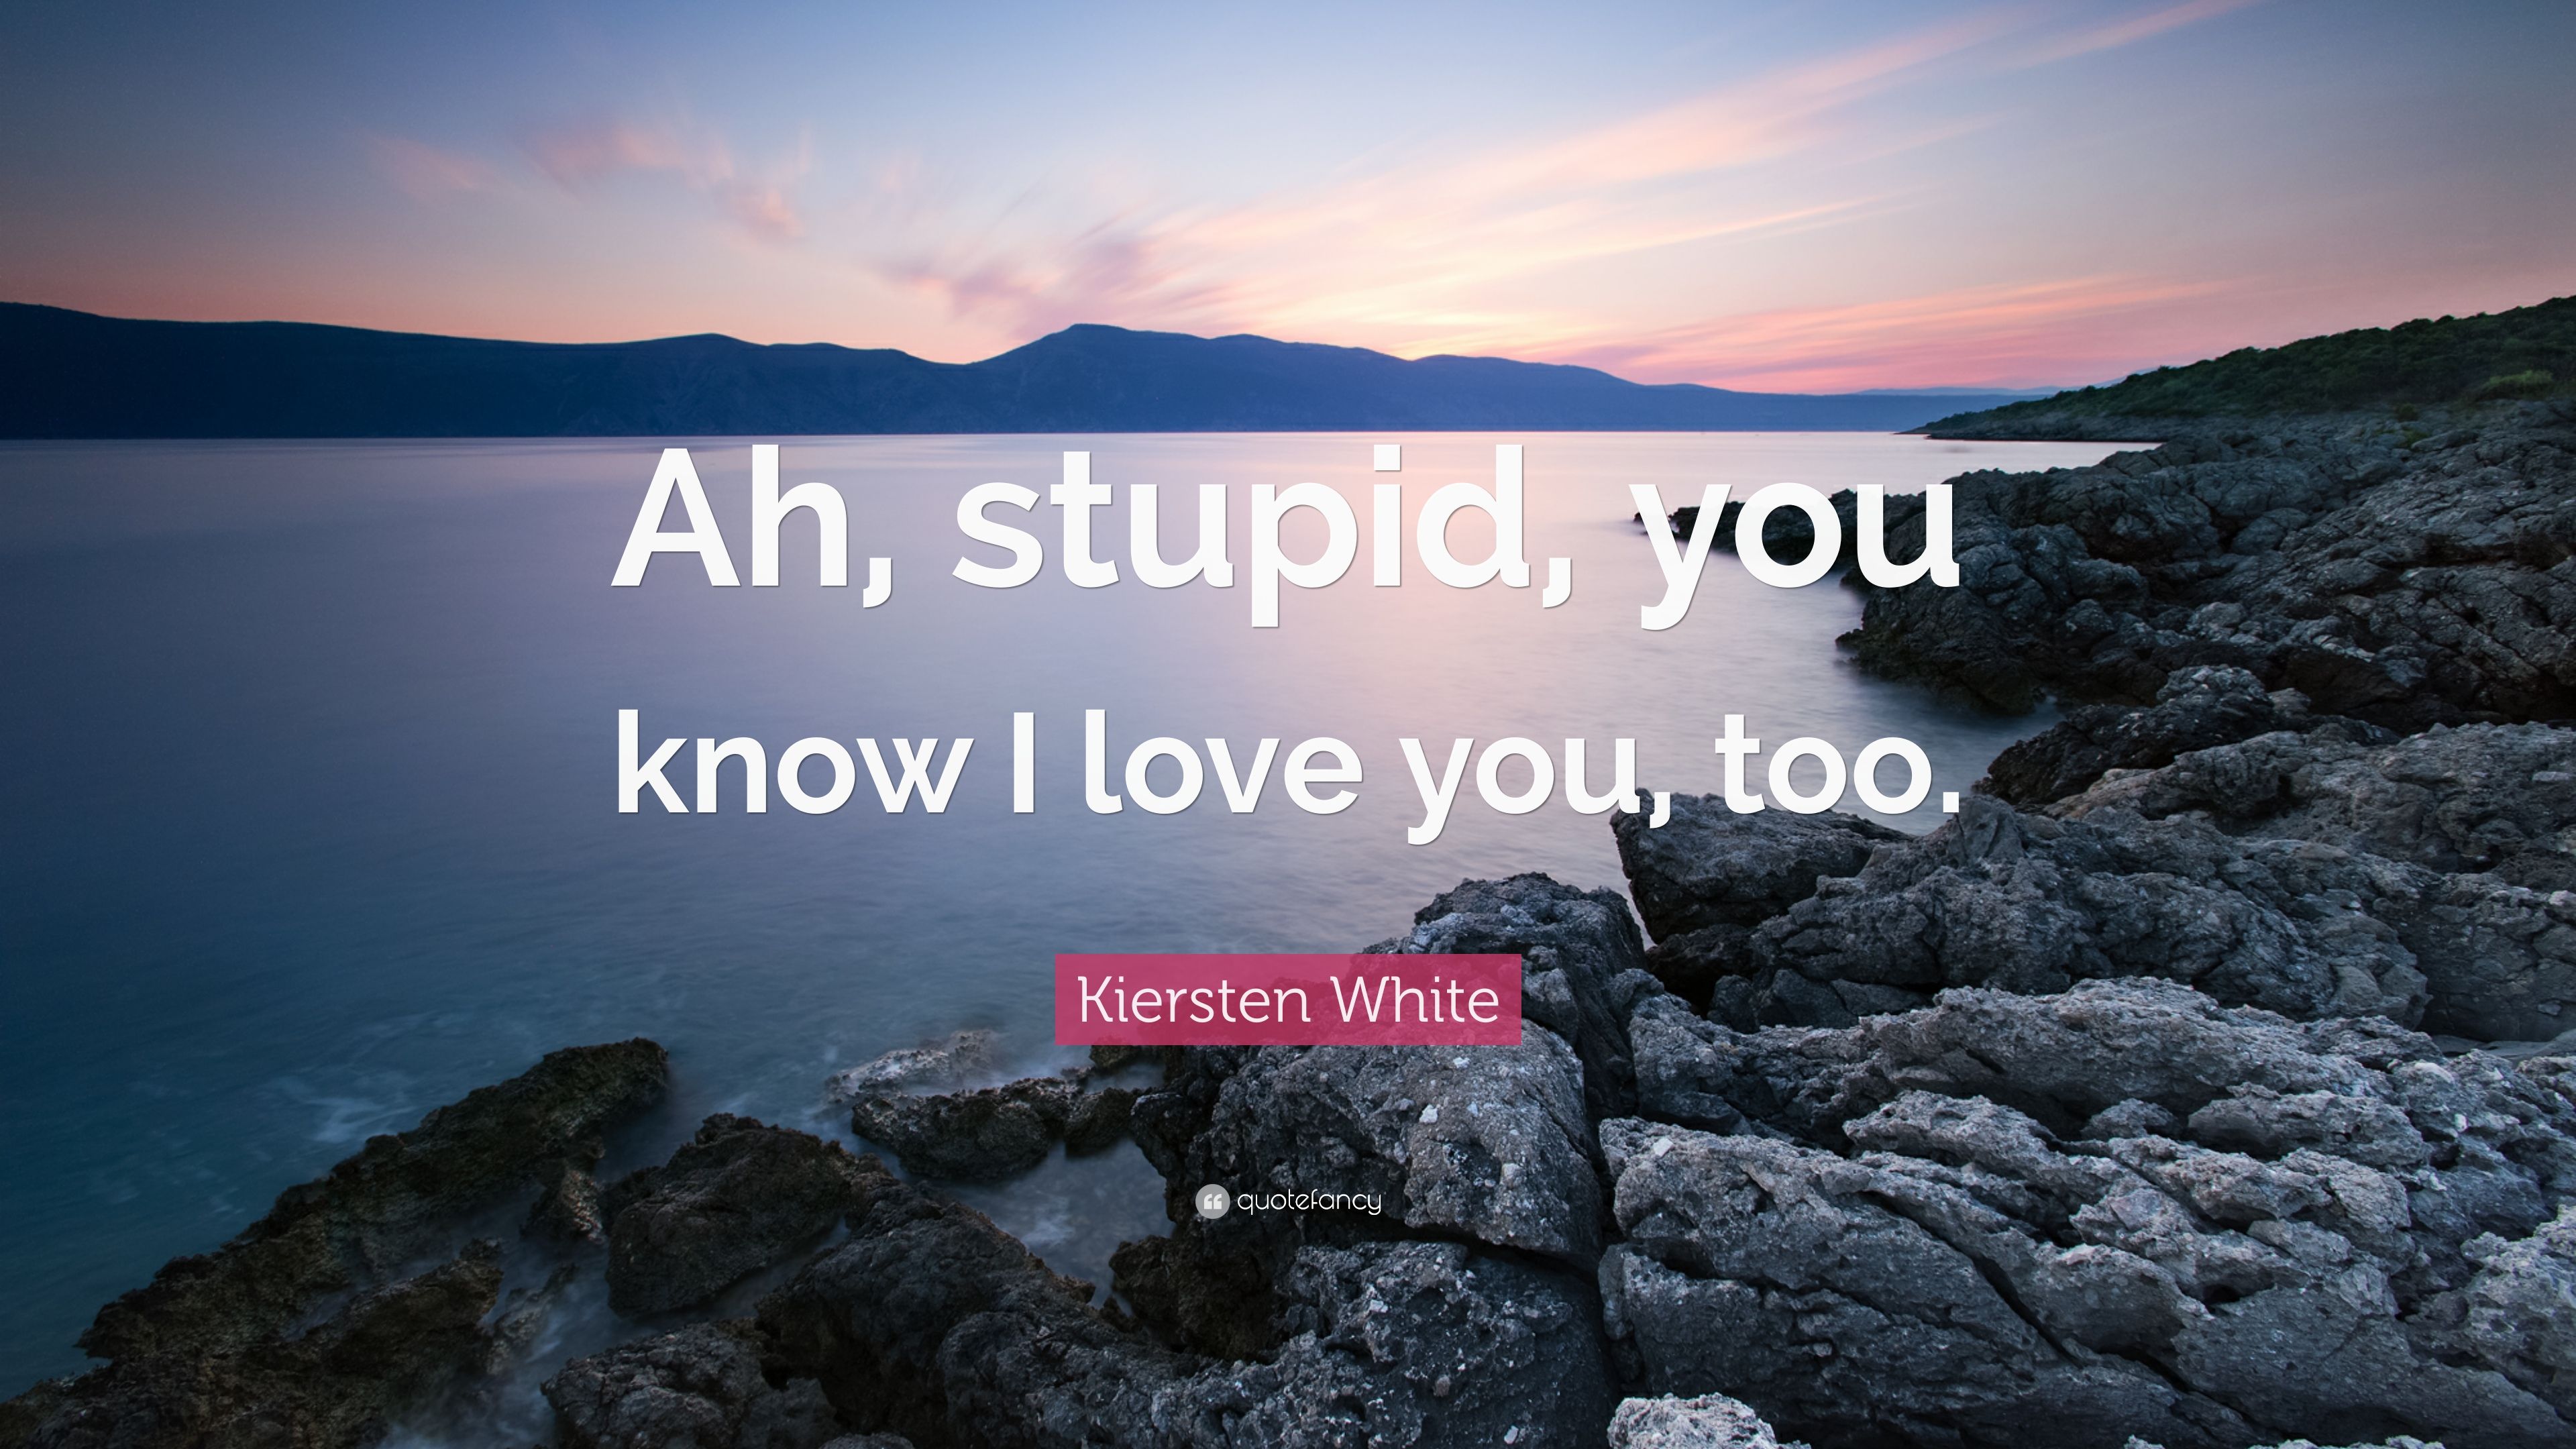 Kiersten White Quote: “Ah, stupid, you know I love you, too.” (7 wallpaper)